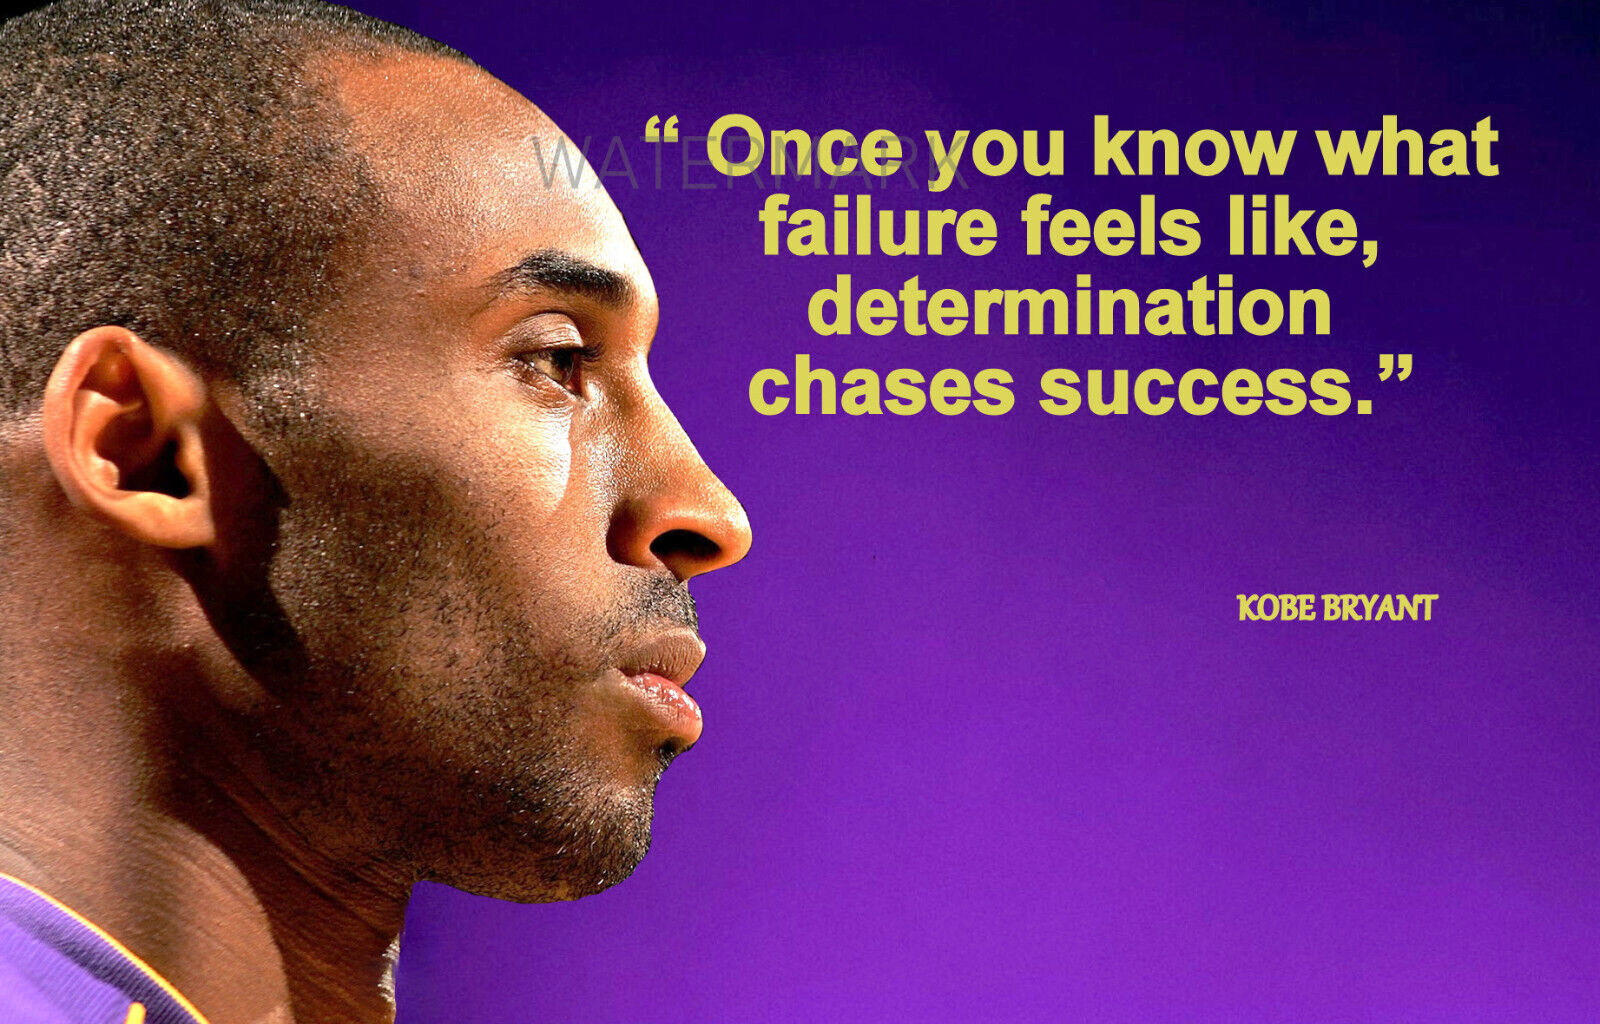 KOBE BRYANT 24 MOTIVATION QUOTE ONCE YOU KNOW WHAT FAILURE FEELS PHOTO ALL SIZES